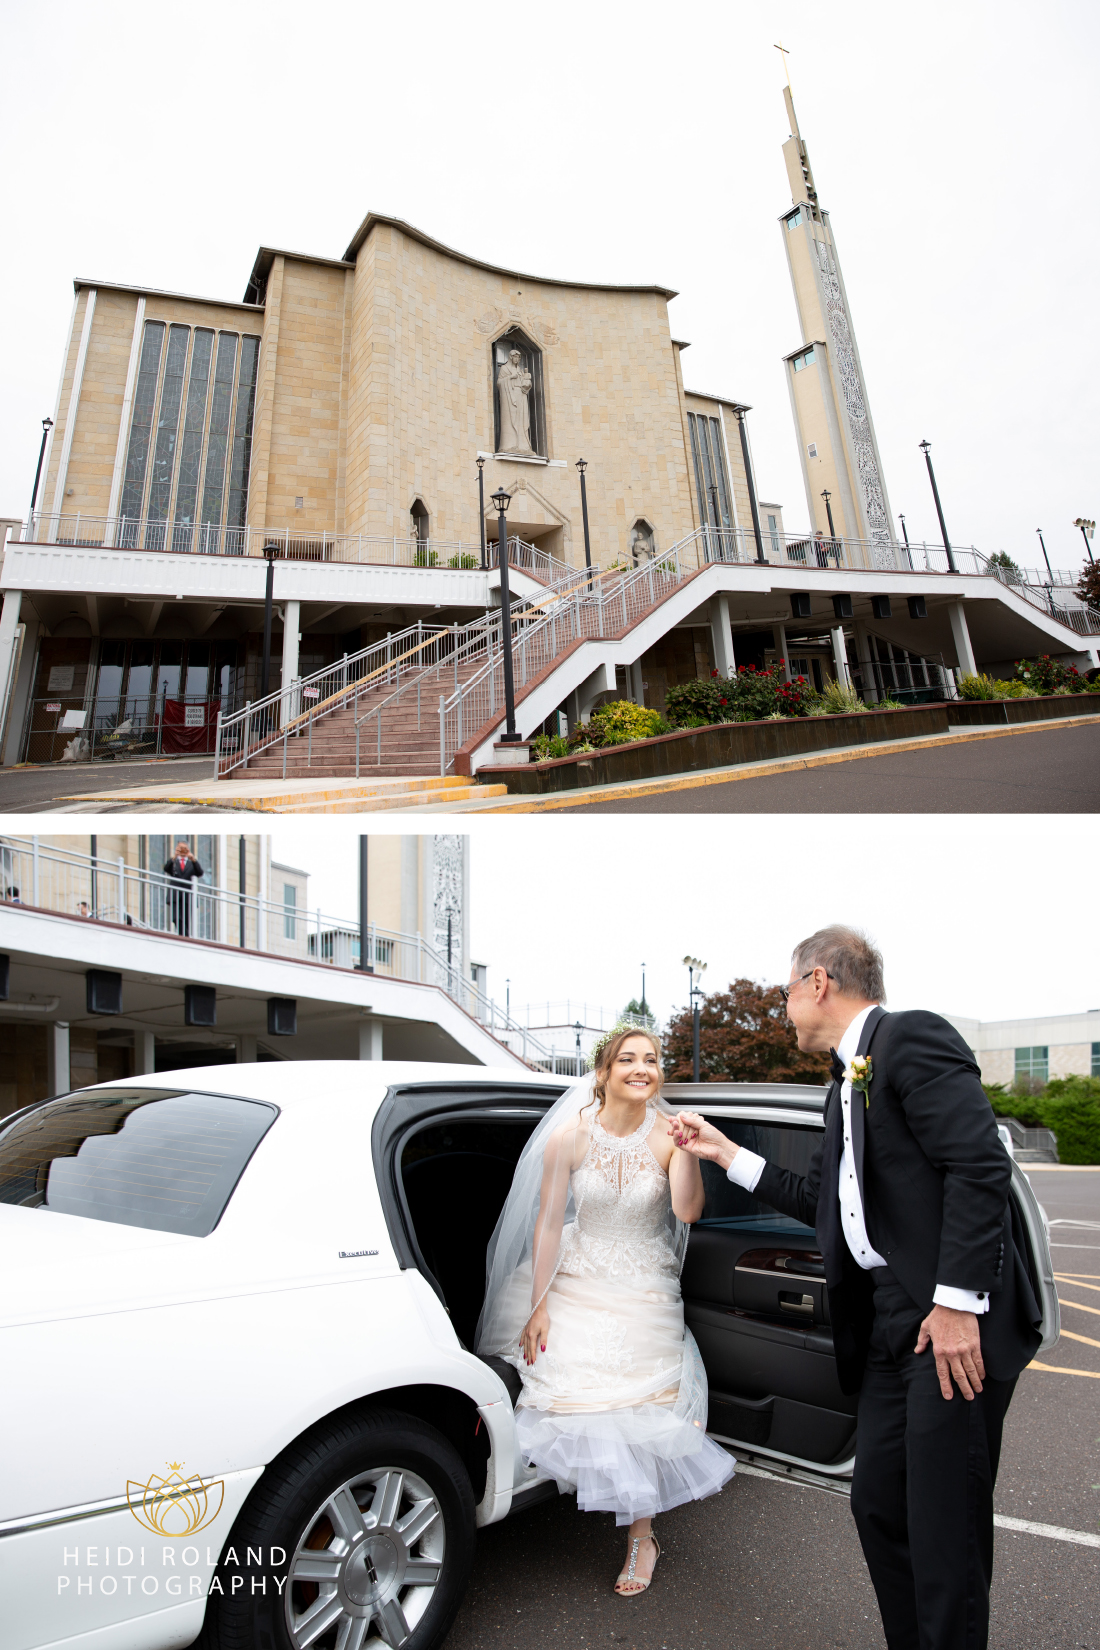 Bride getting out of limo with help from father before wedding ceremony